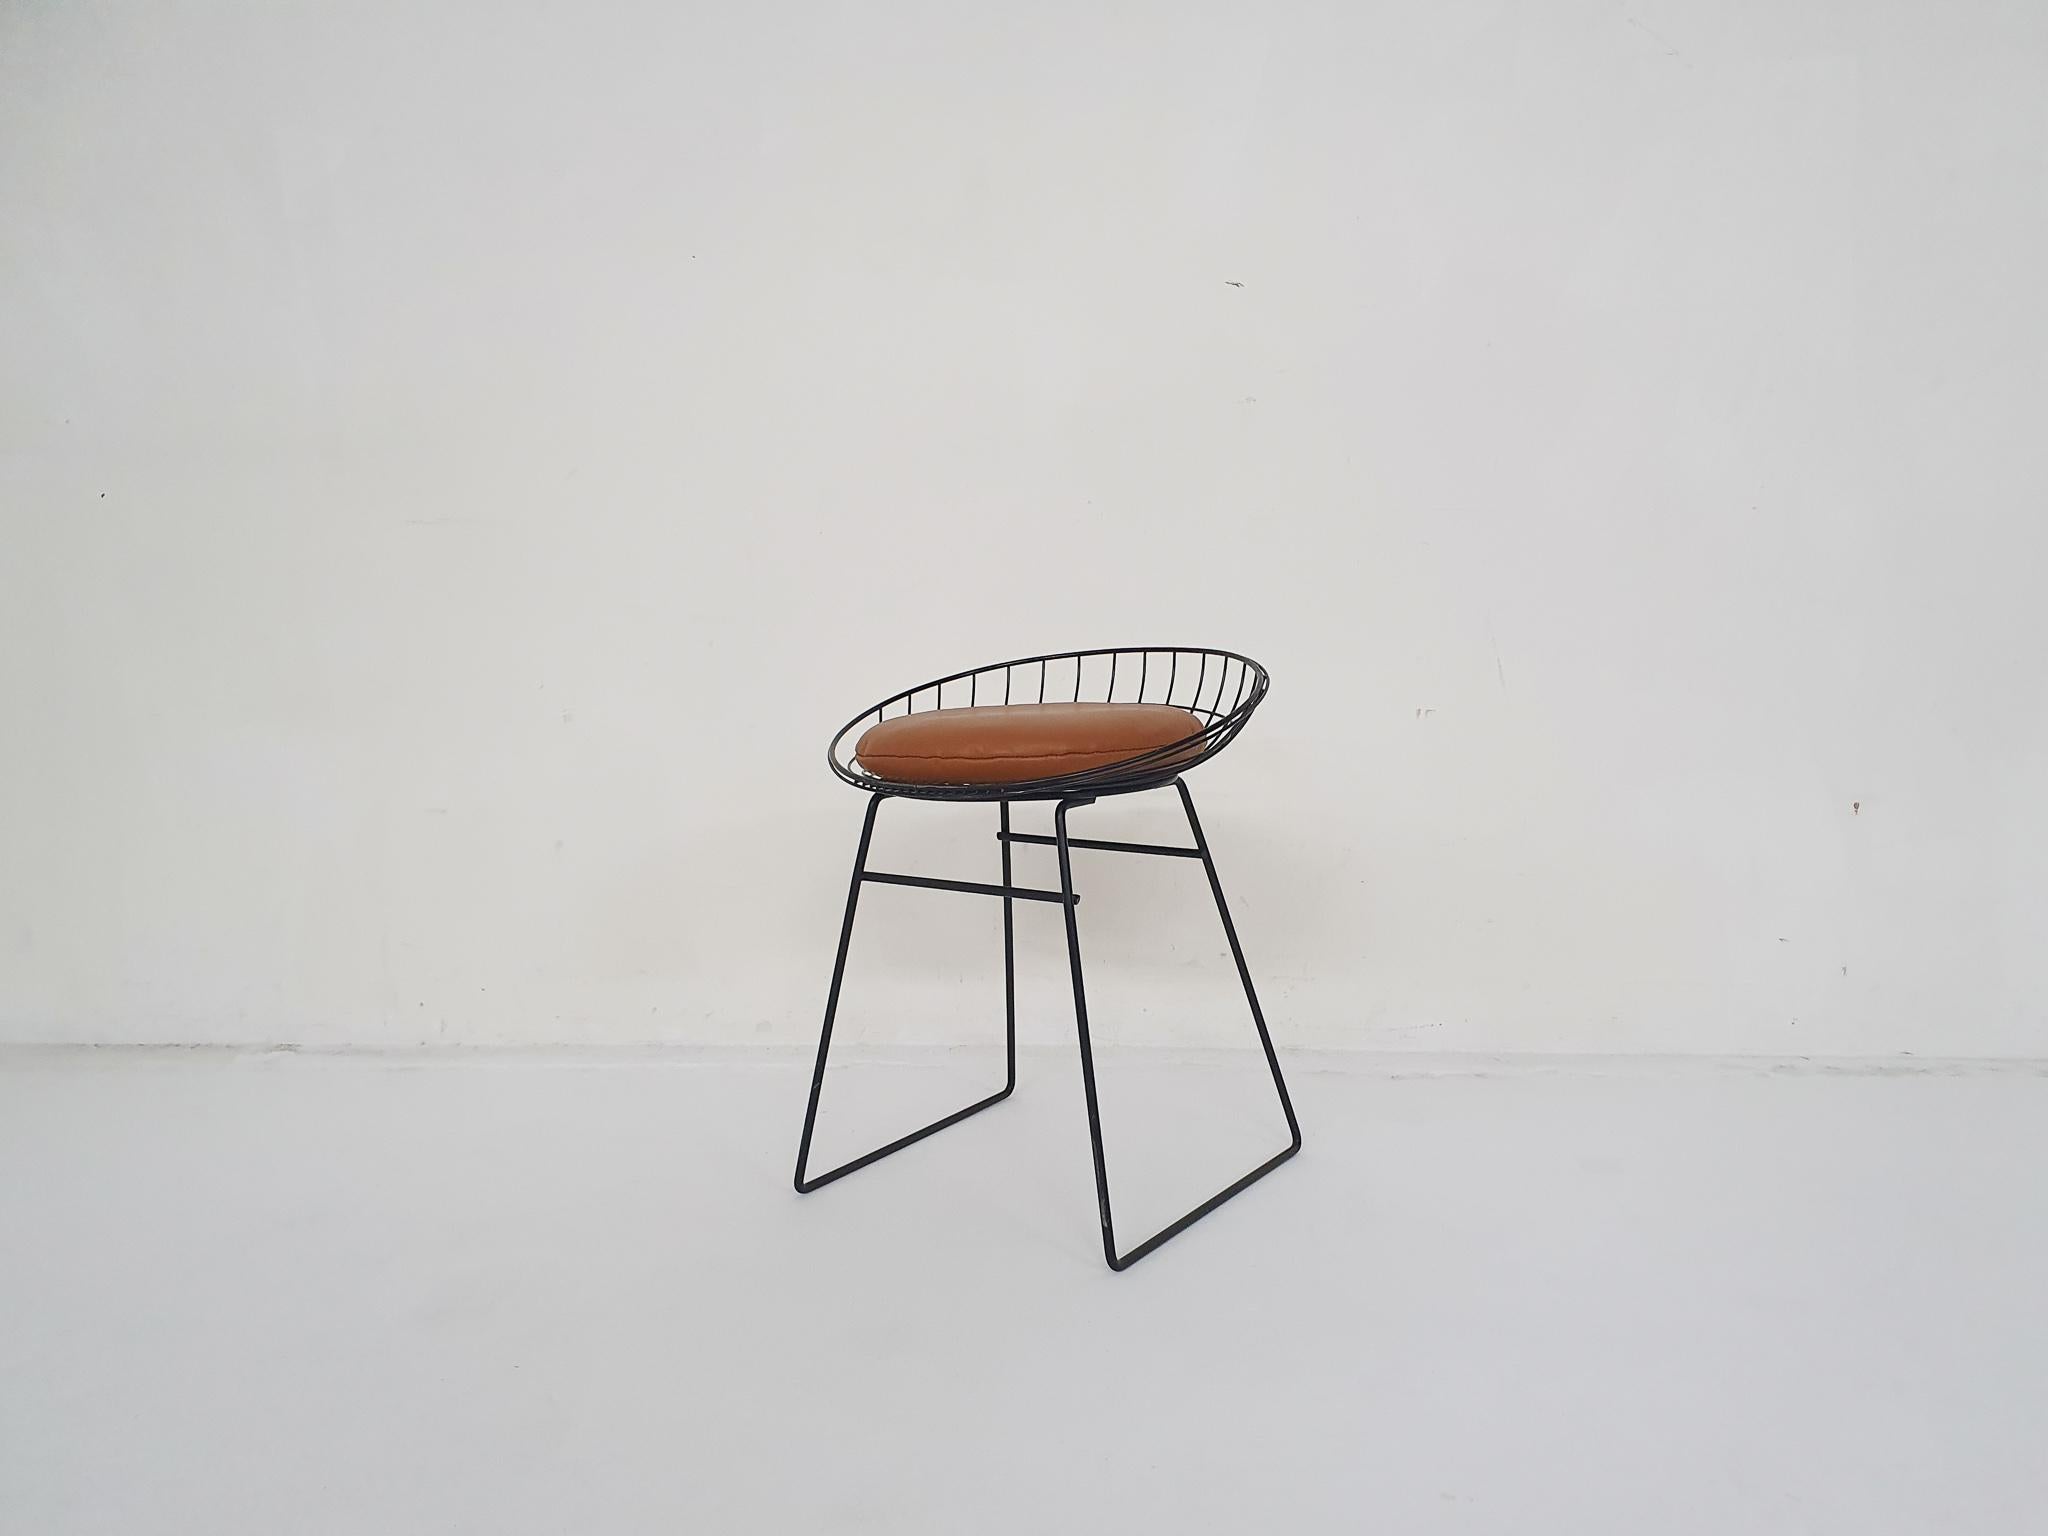 Black metal wire stool designed by Adriaan Dekker and Cees Braakman in 1958 for Pastoe.
In very good condition. With a cognac leather cushion

Cees Braakman was a Dutch furniture designer who worked for UMS Pastoe in the midcentury. He designed